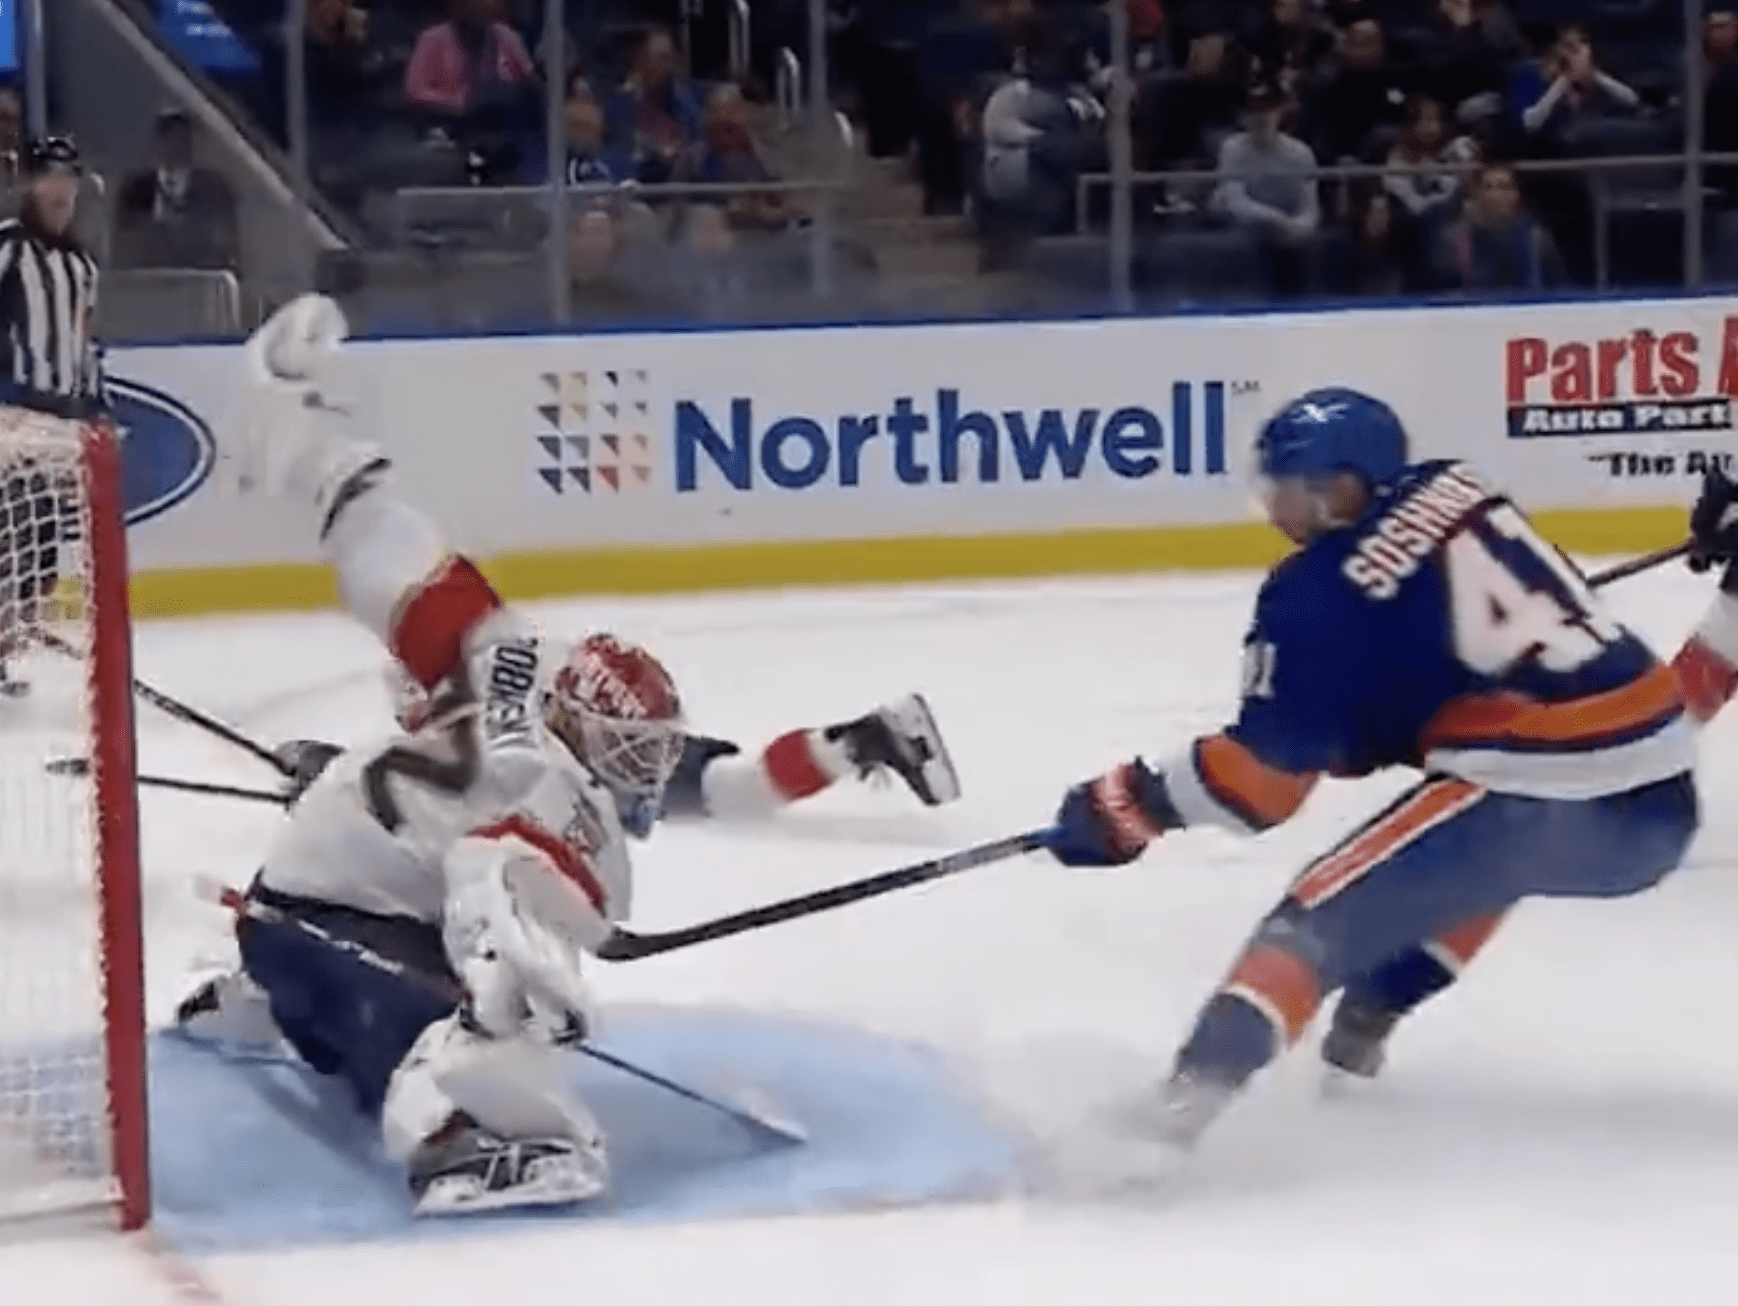 Beauvillier & Barzal Discuss Islanders Series Win Over Panthers